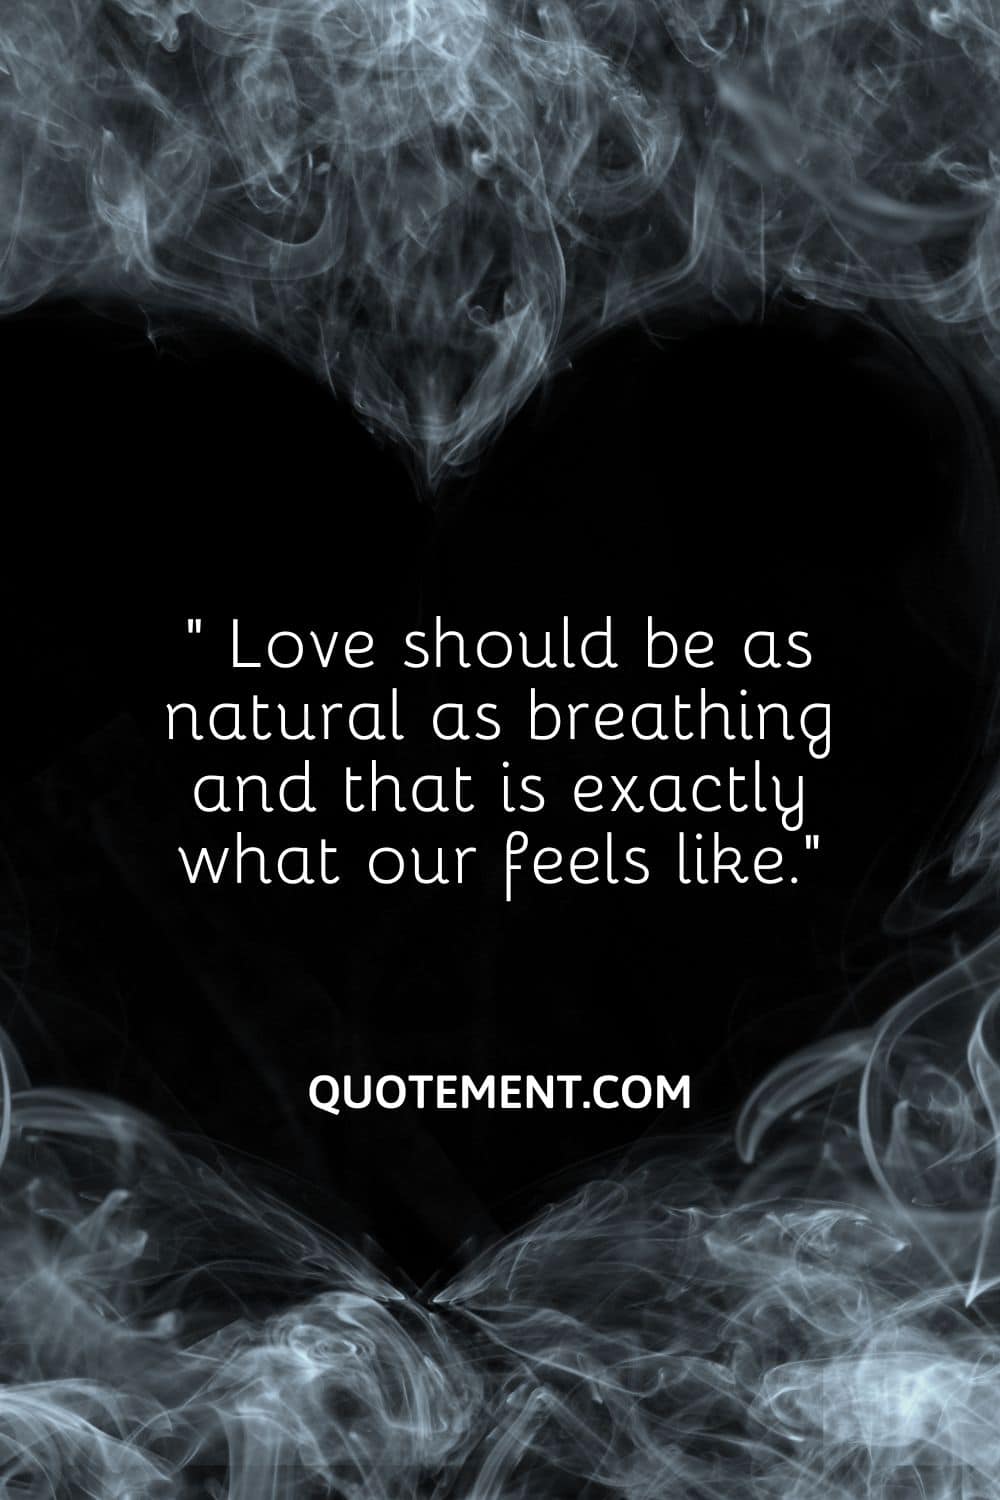 Love should be as natural as breathing and that is exactly what our feels like